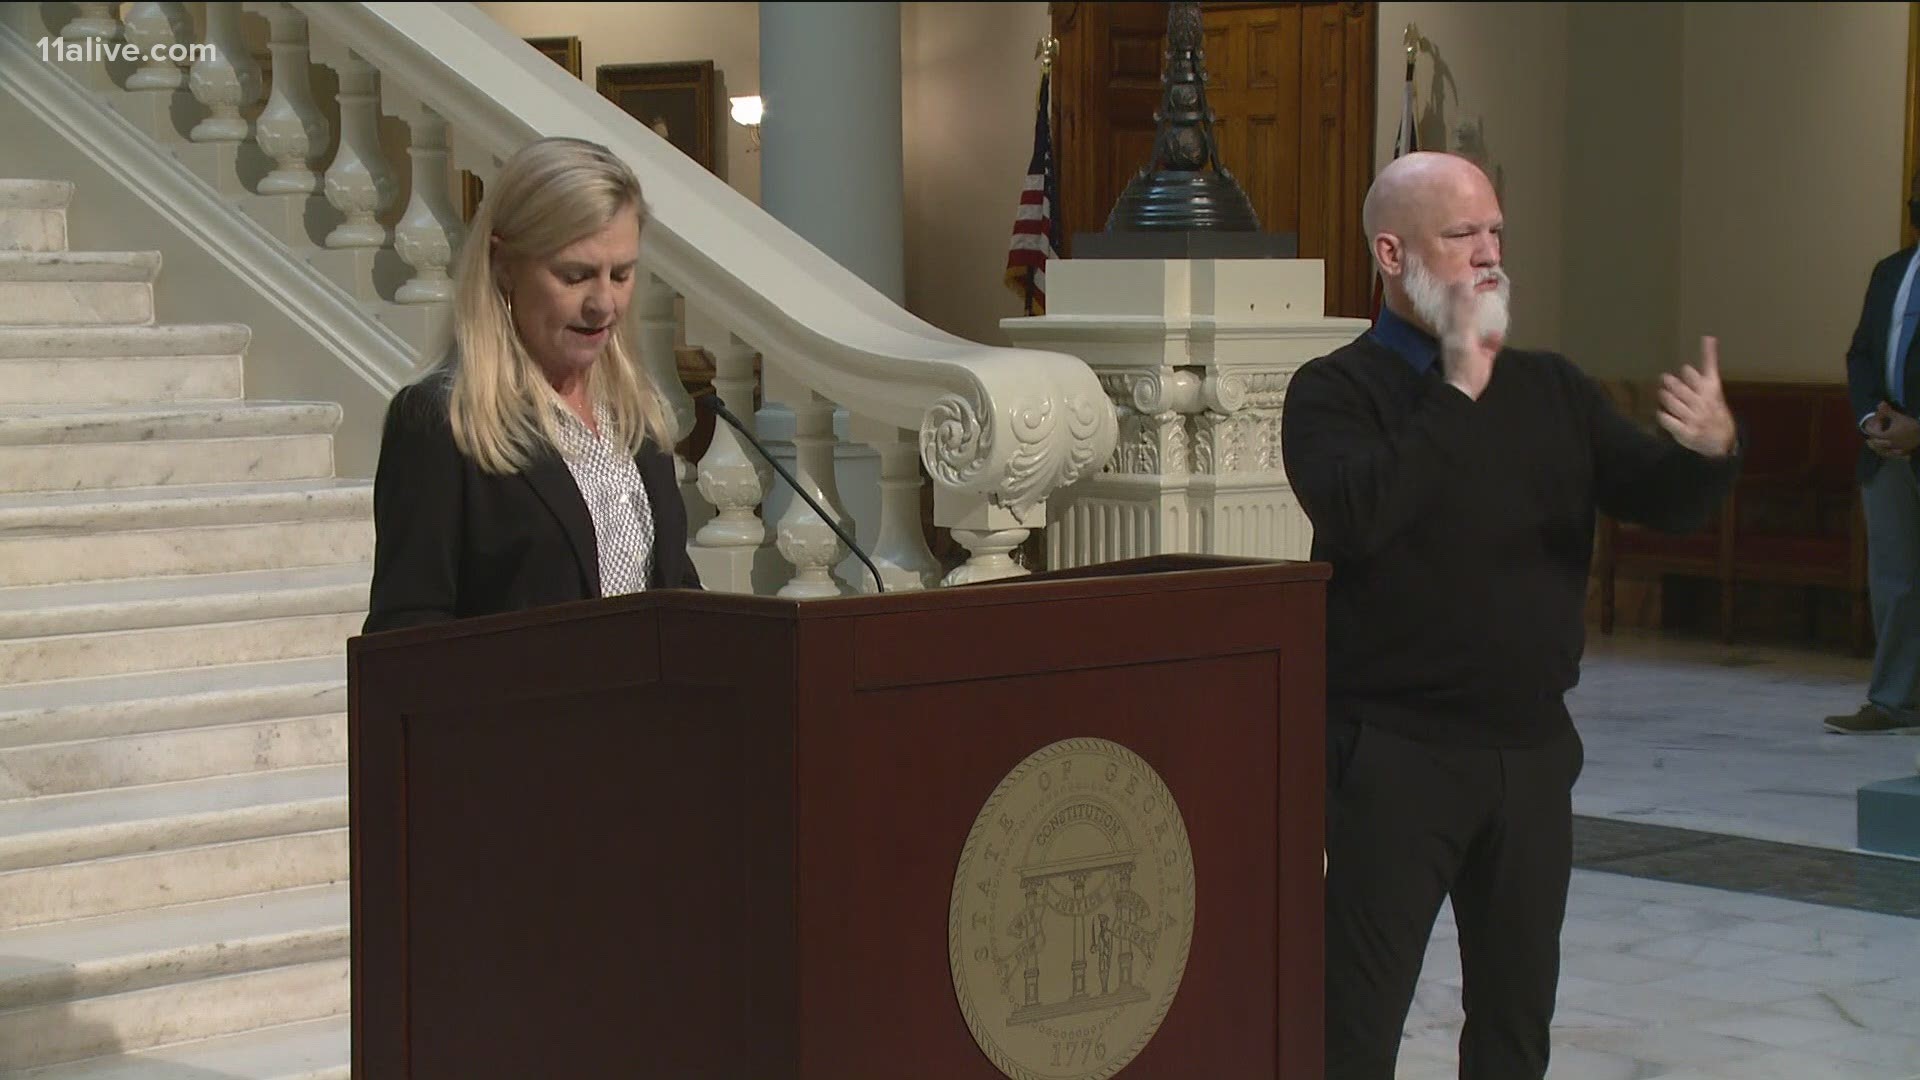 The announcement was made this morning at the State Capitol.